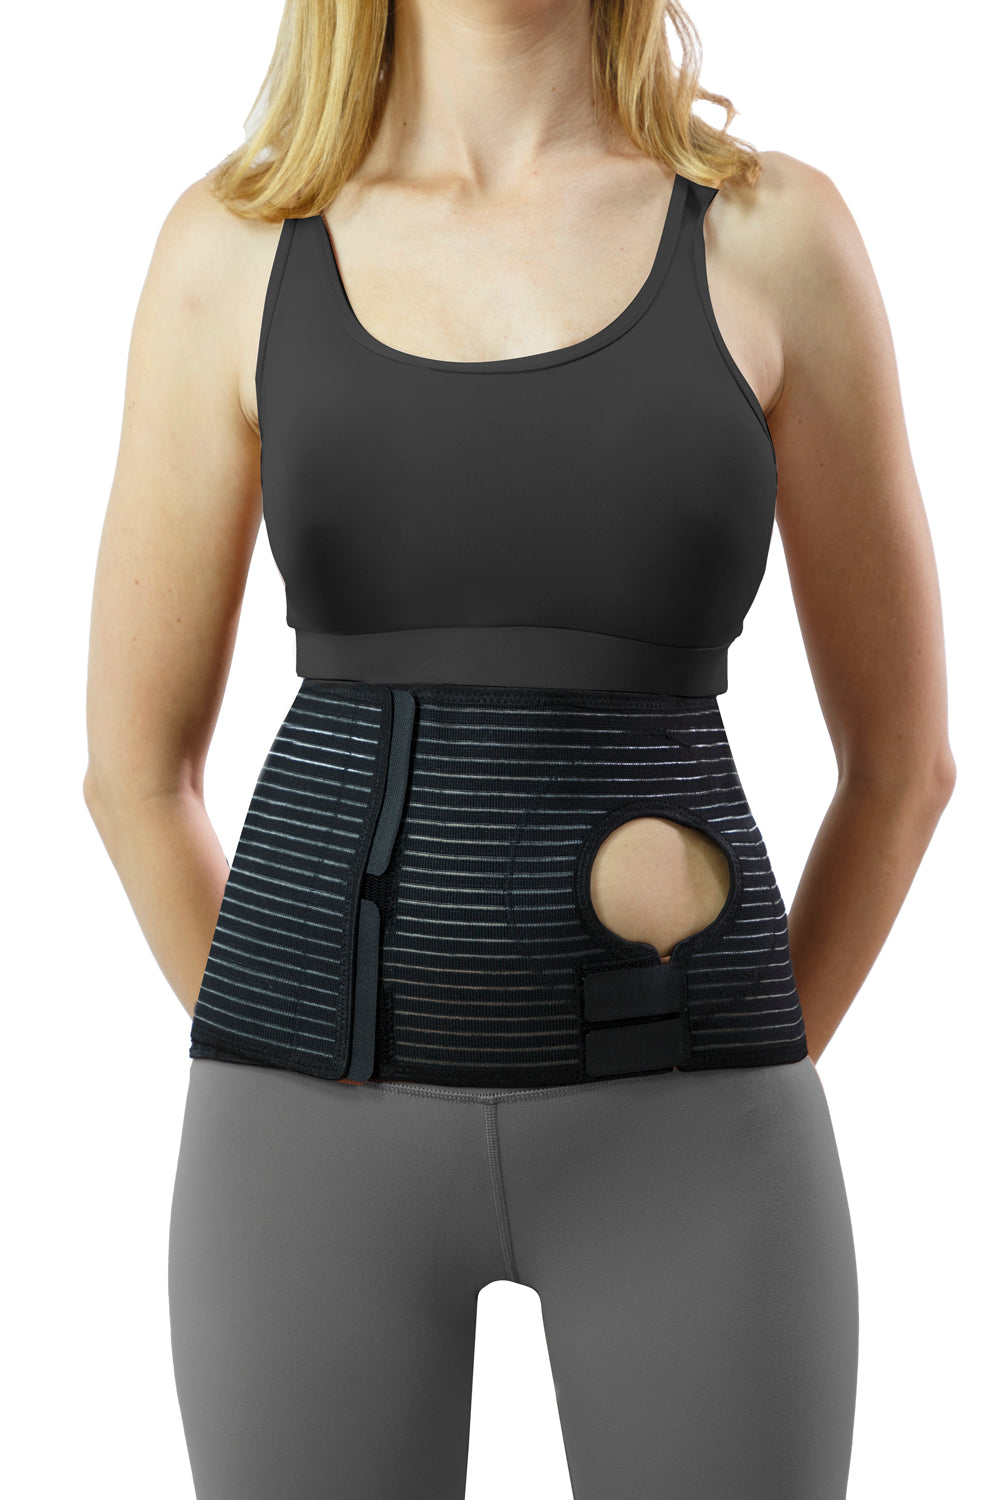 ORTONYX Abdominal Ostomy Belt for Post-Operative Care After